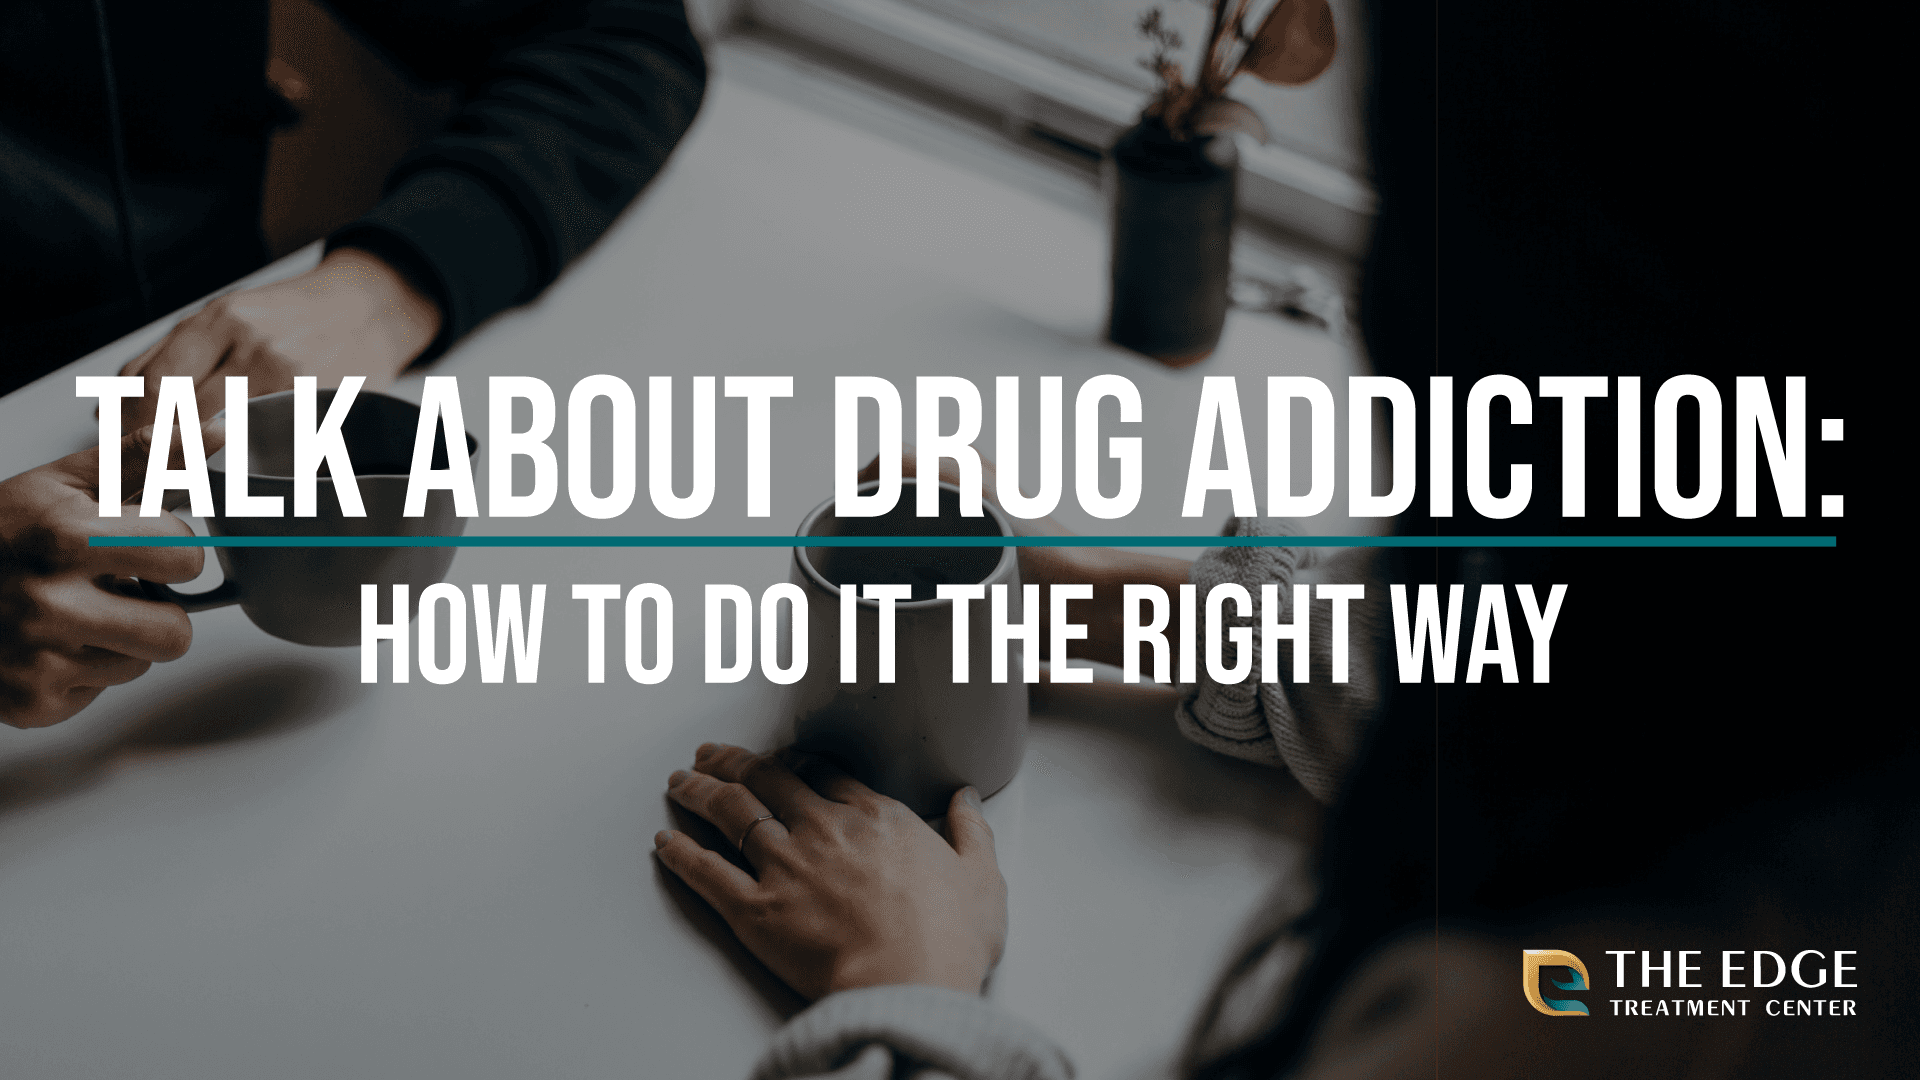 How To Talk About Drug Addiction